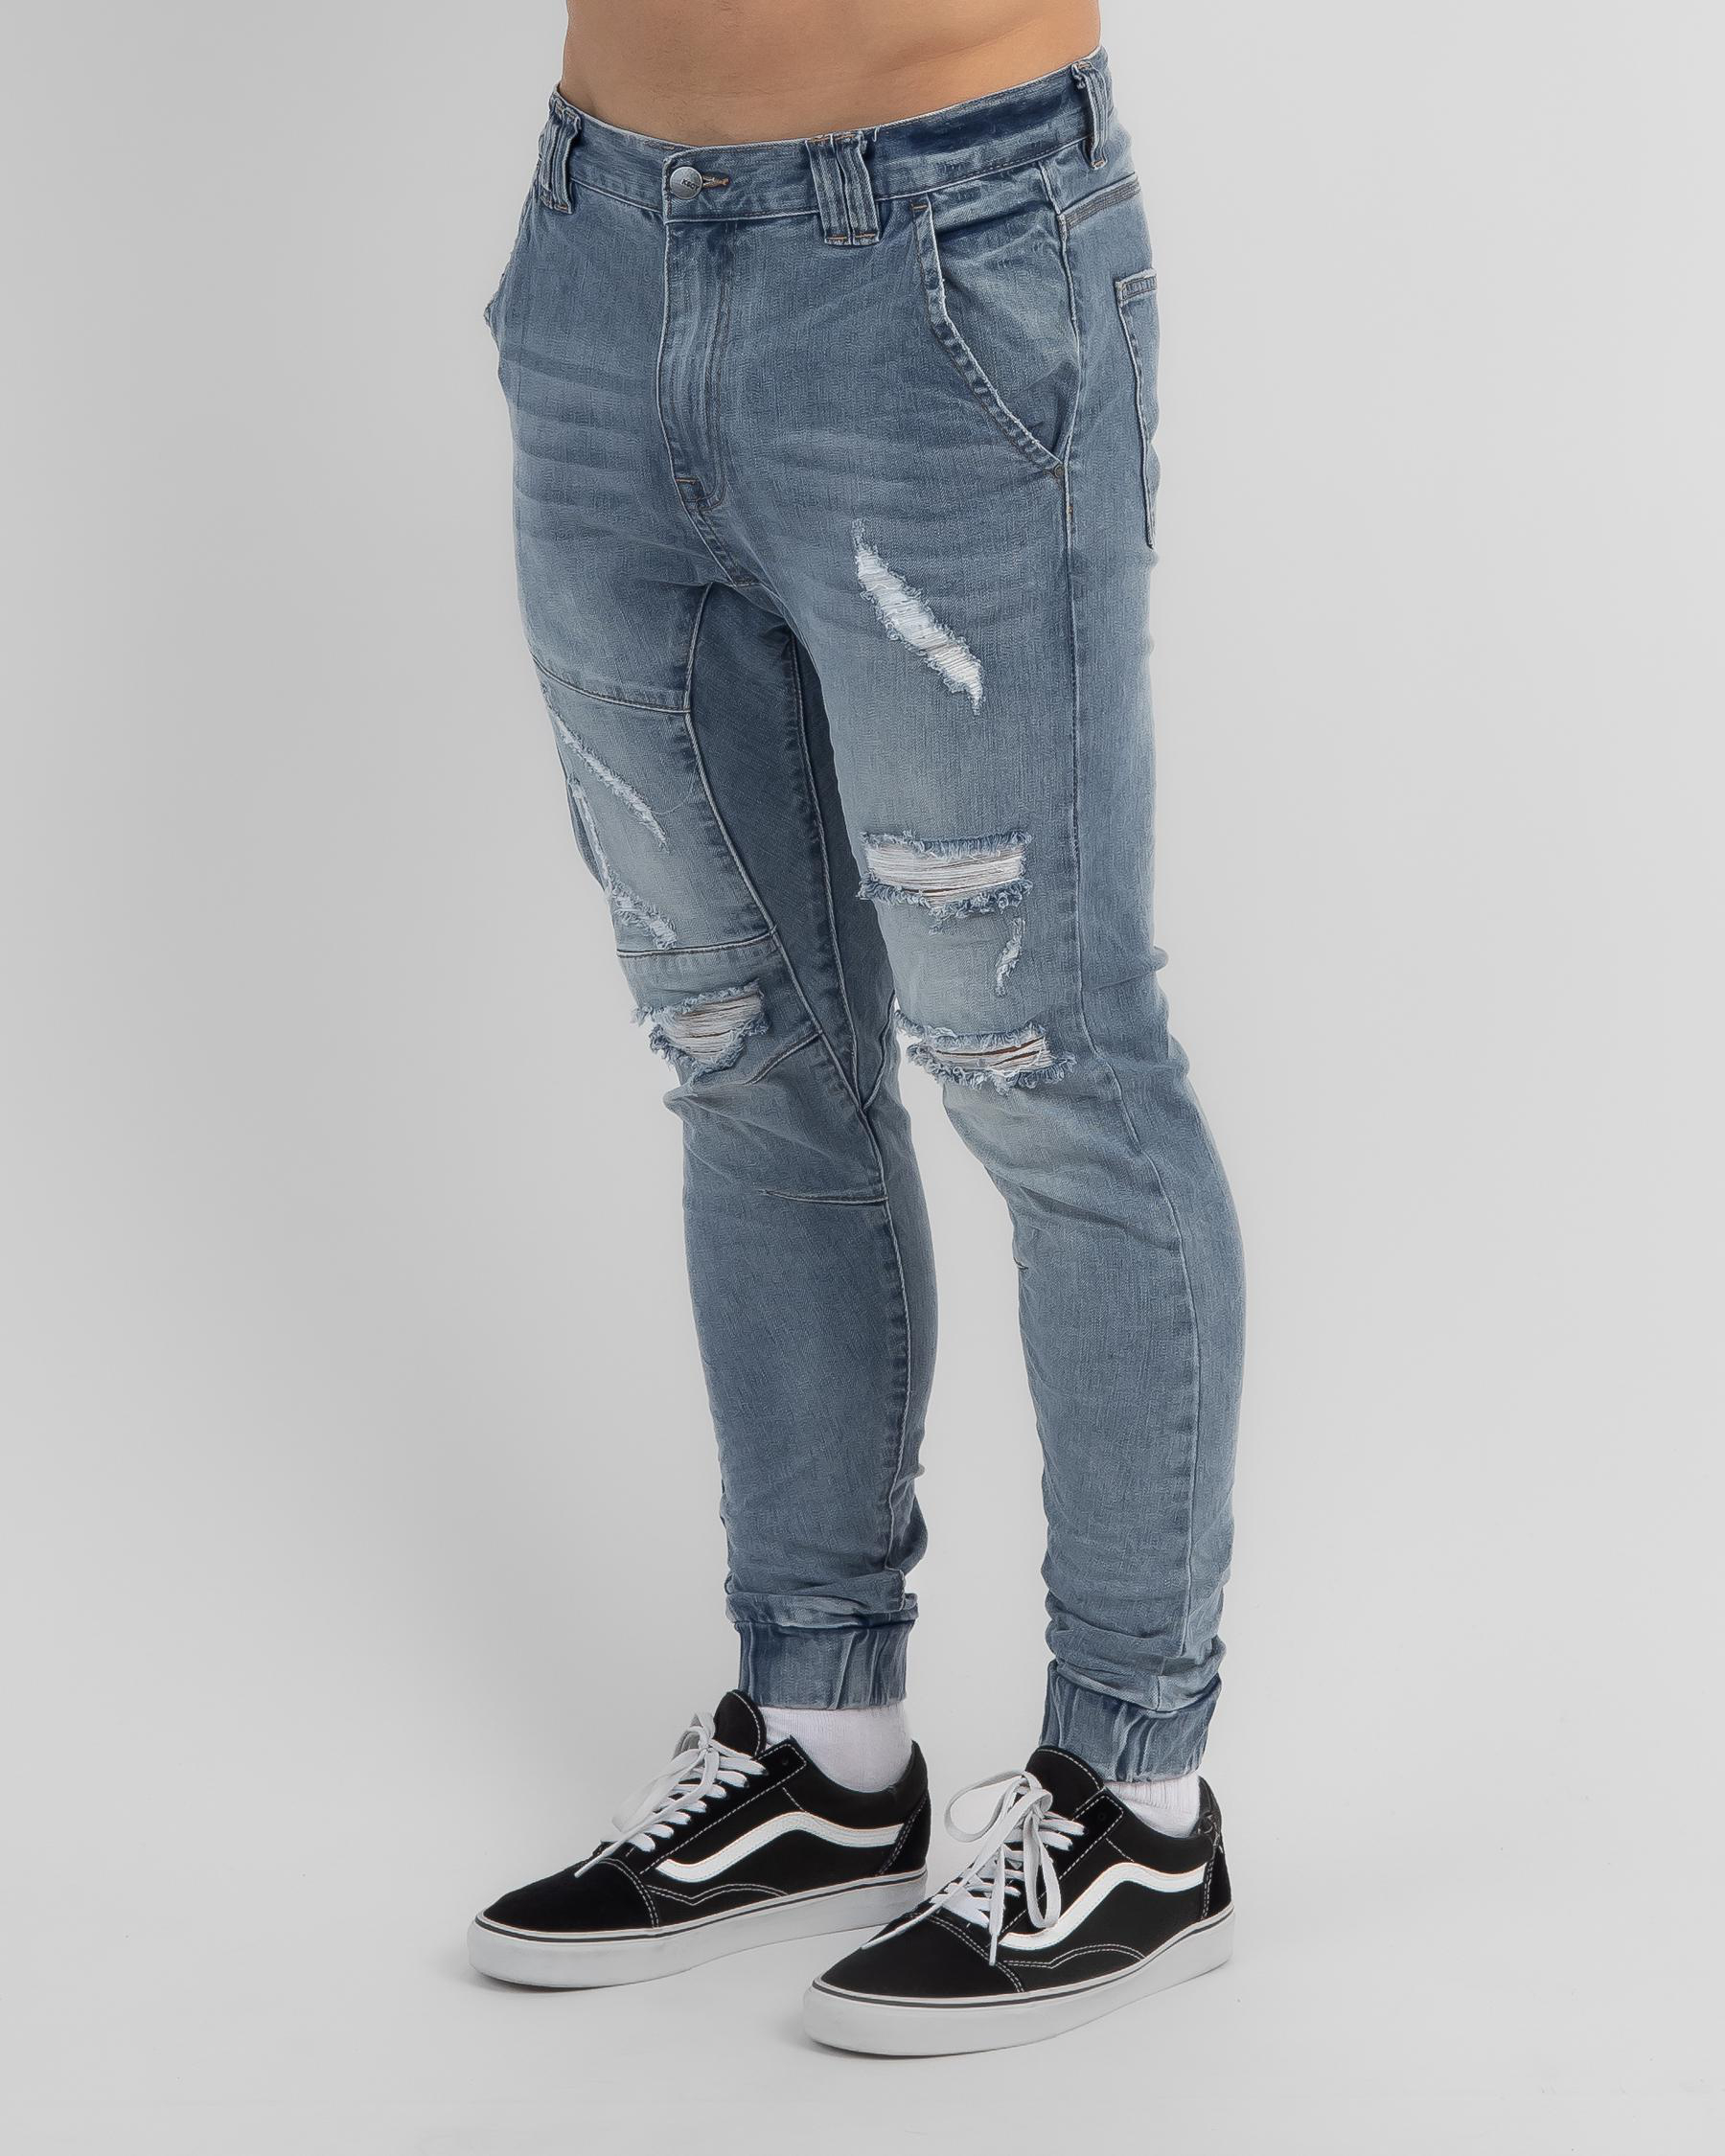 Kiss Chacey Spartan Denim Jogger Pants In Horizon Blue - Fast Shipping ...